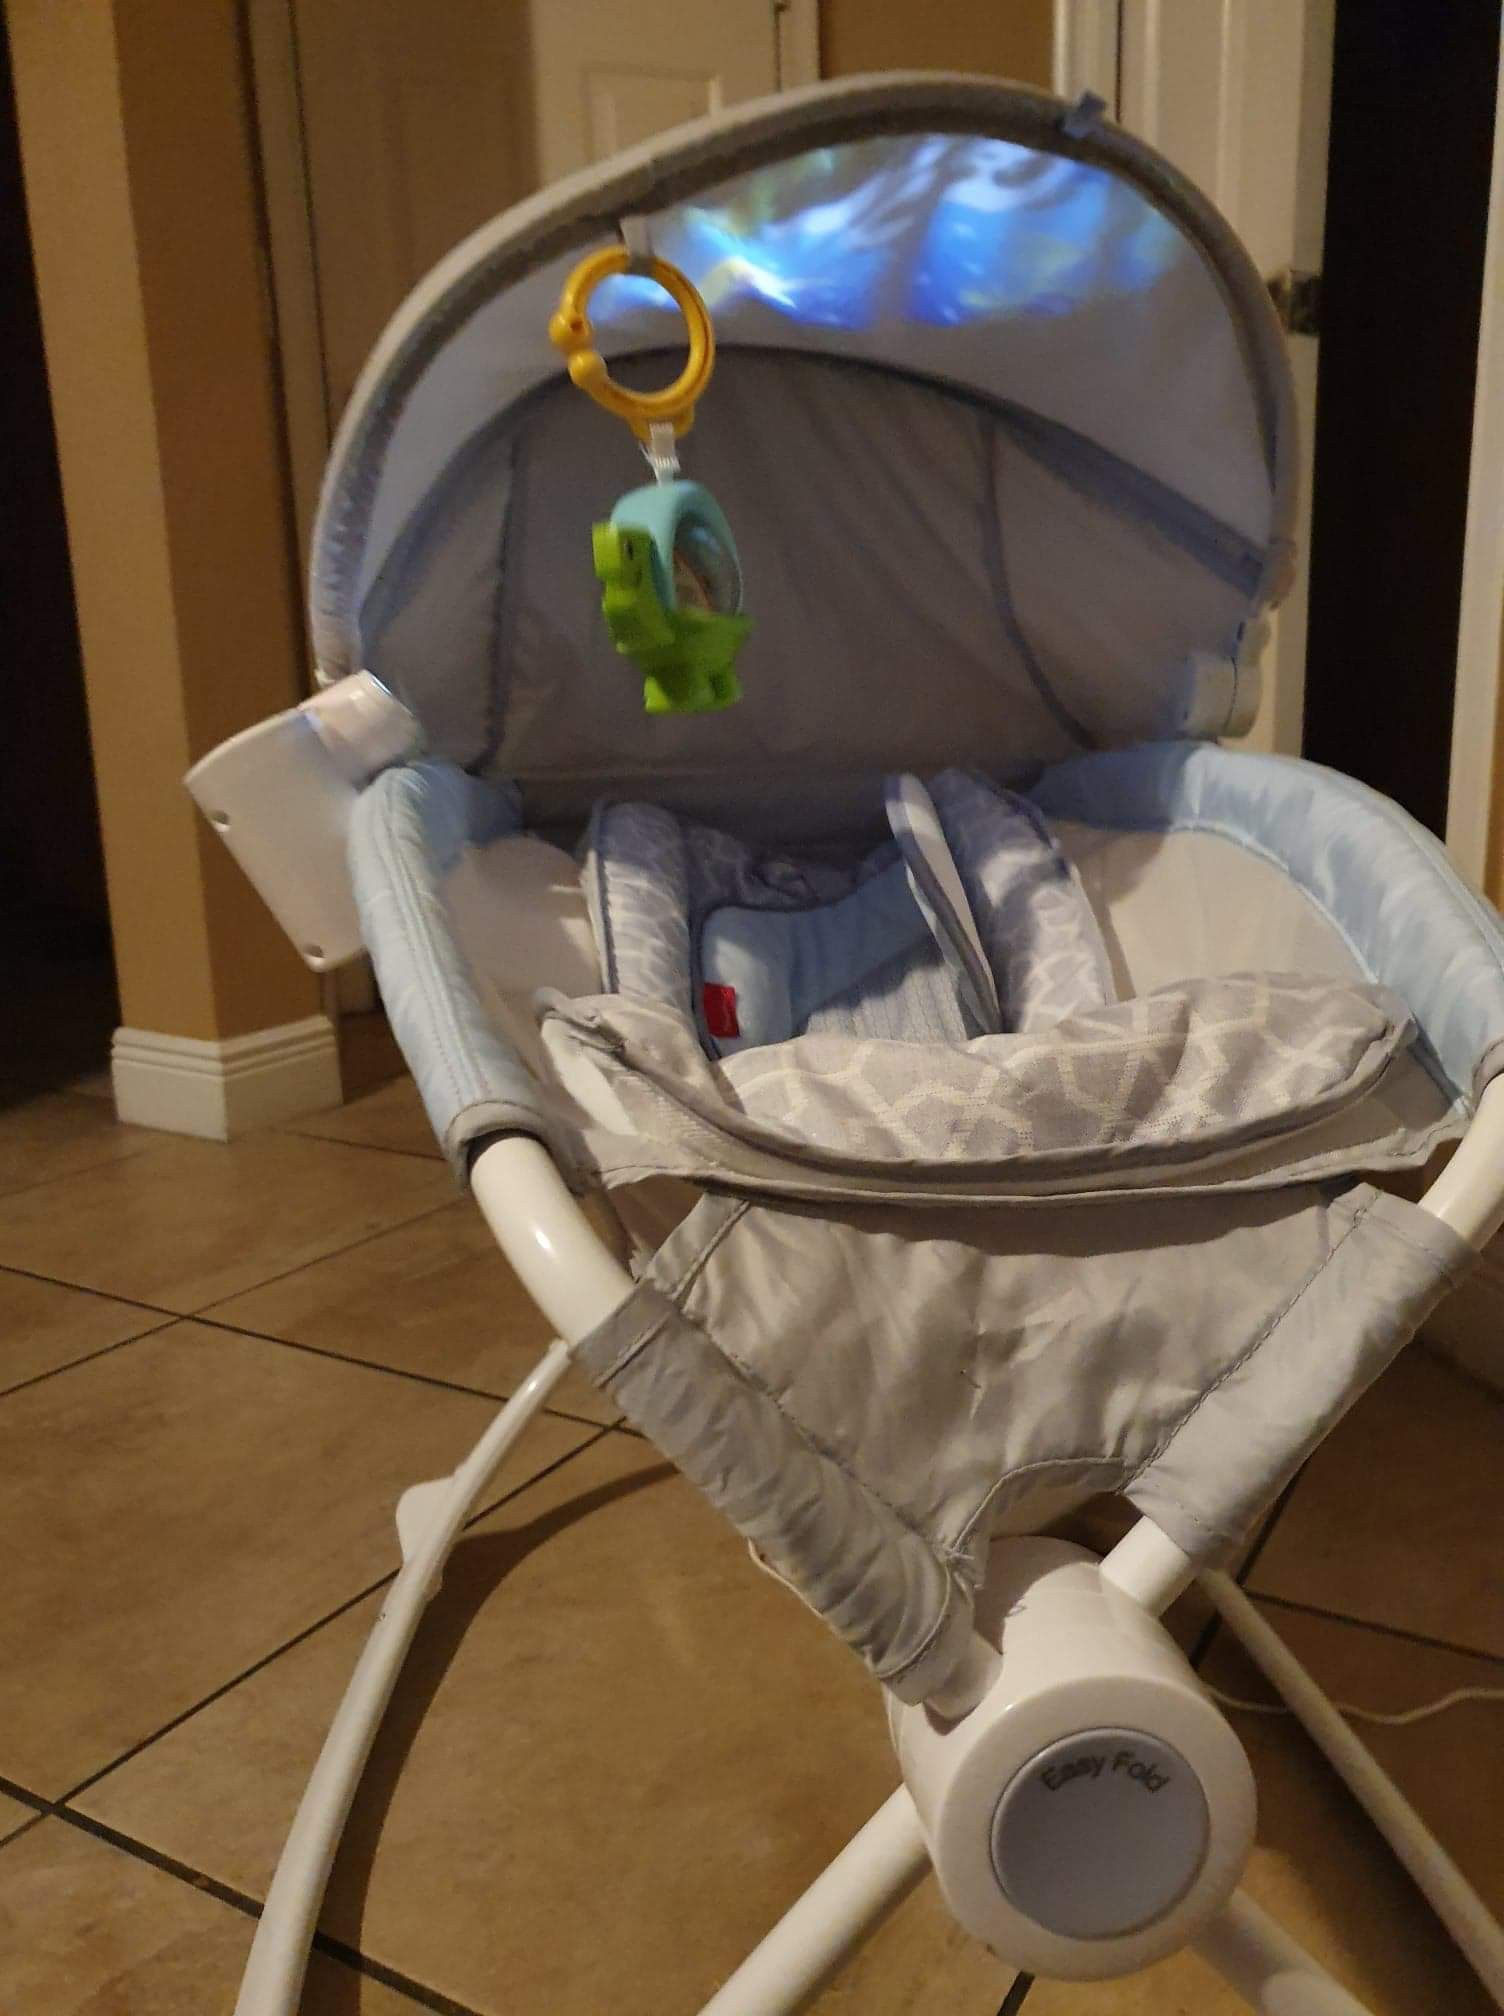 Fisherprice baby swing with projector